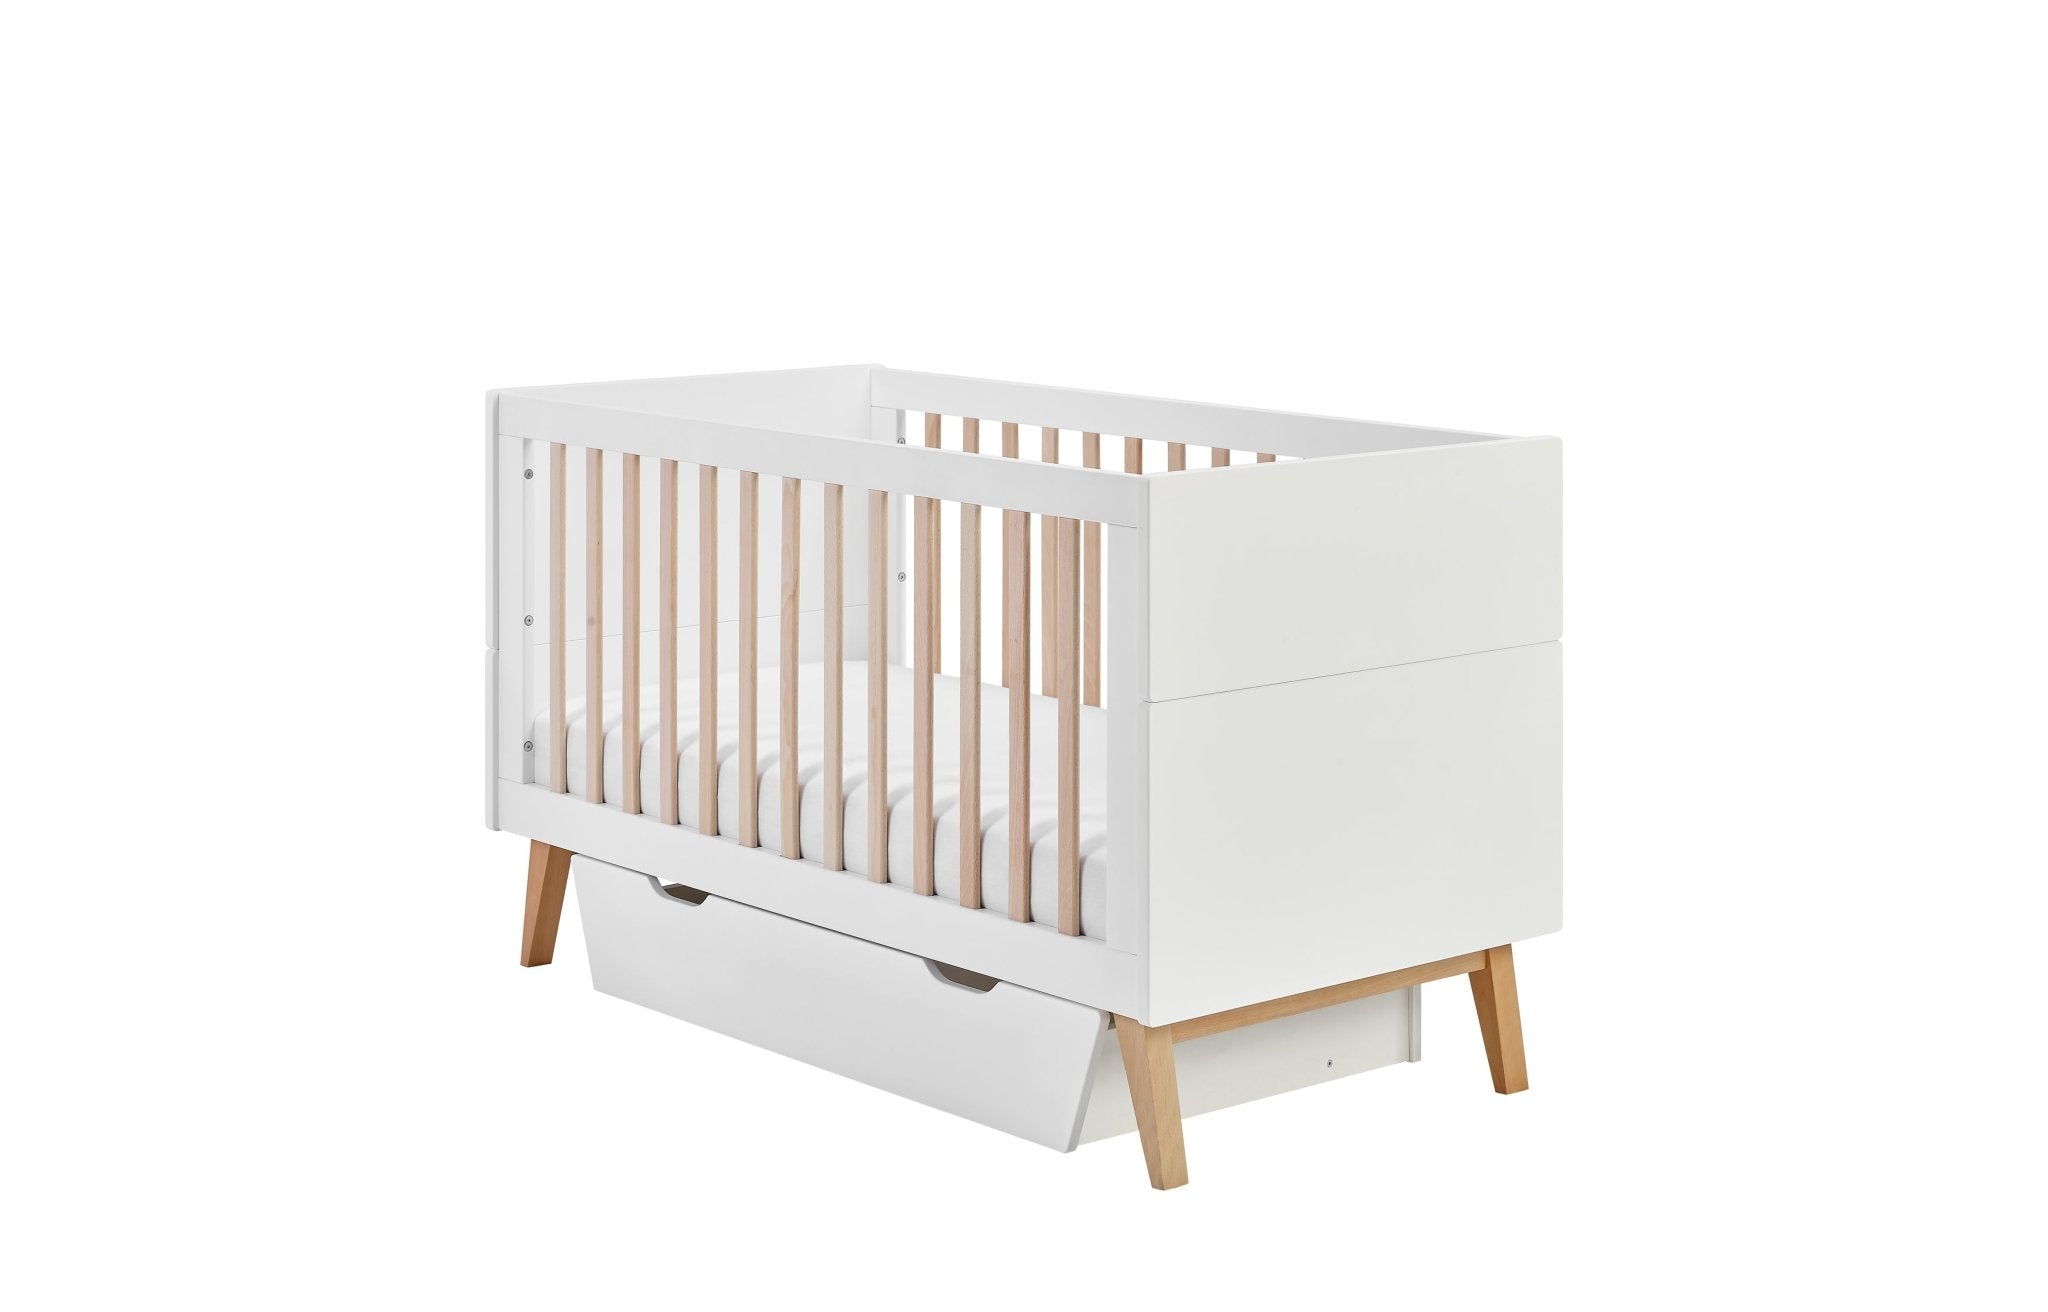 Saga under Bed/Cot drawer, 140 x 70 cm White color - Scandinavian Stories by Marton